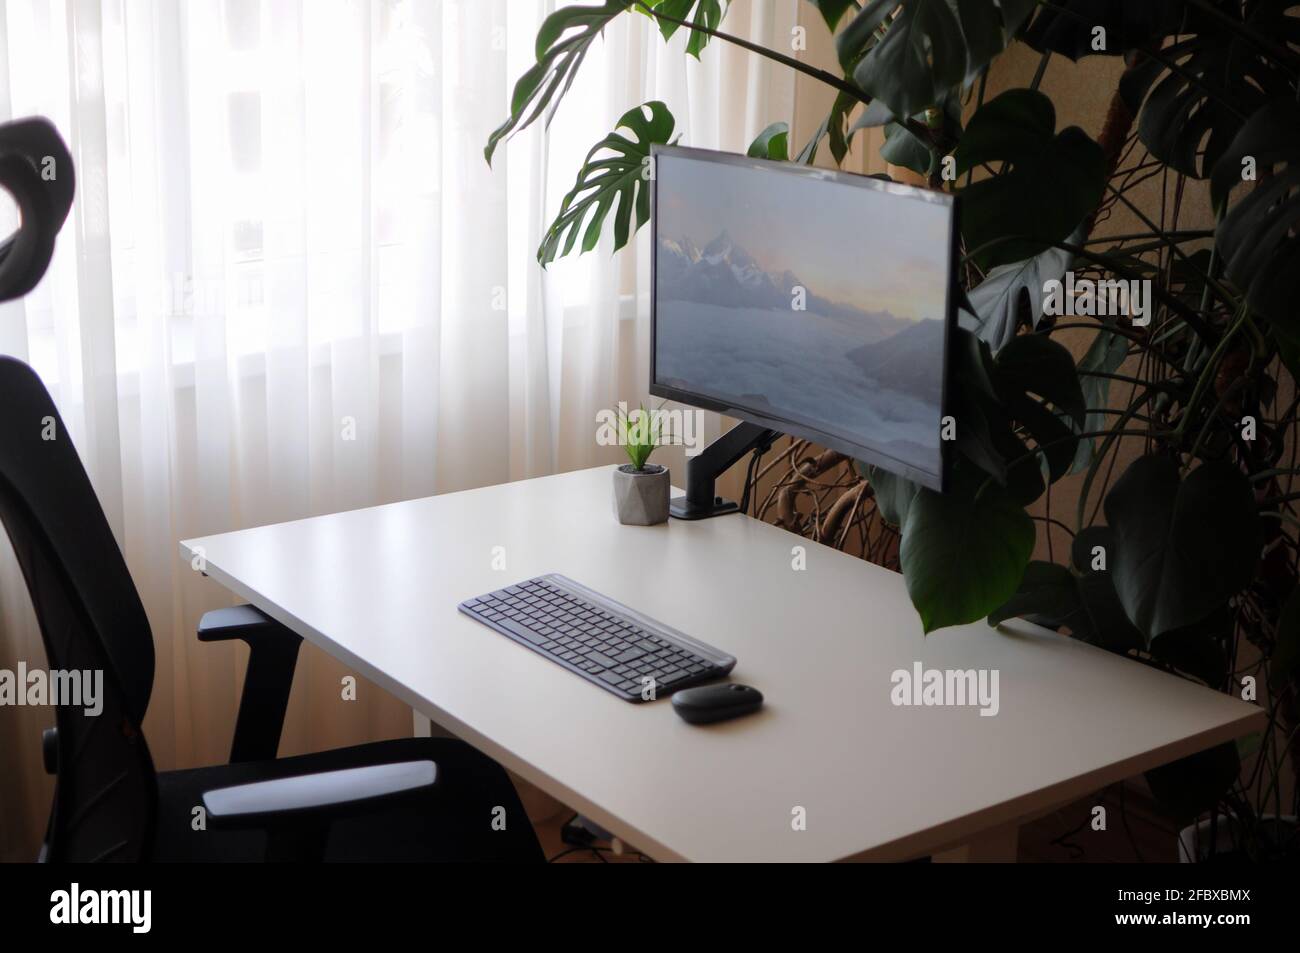 Modern home office with curved screen and orthopaedic chair.Interior with plants Stock Photo